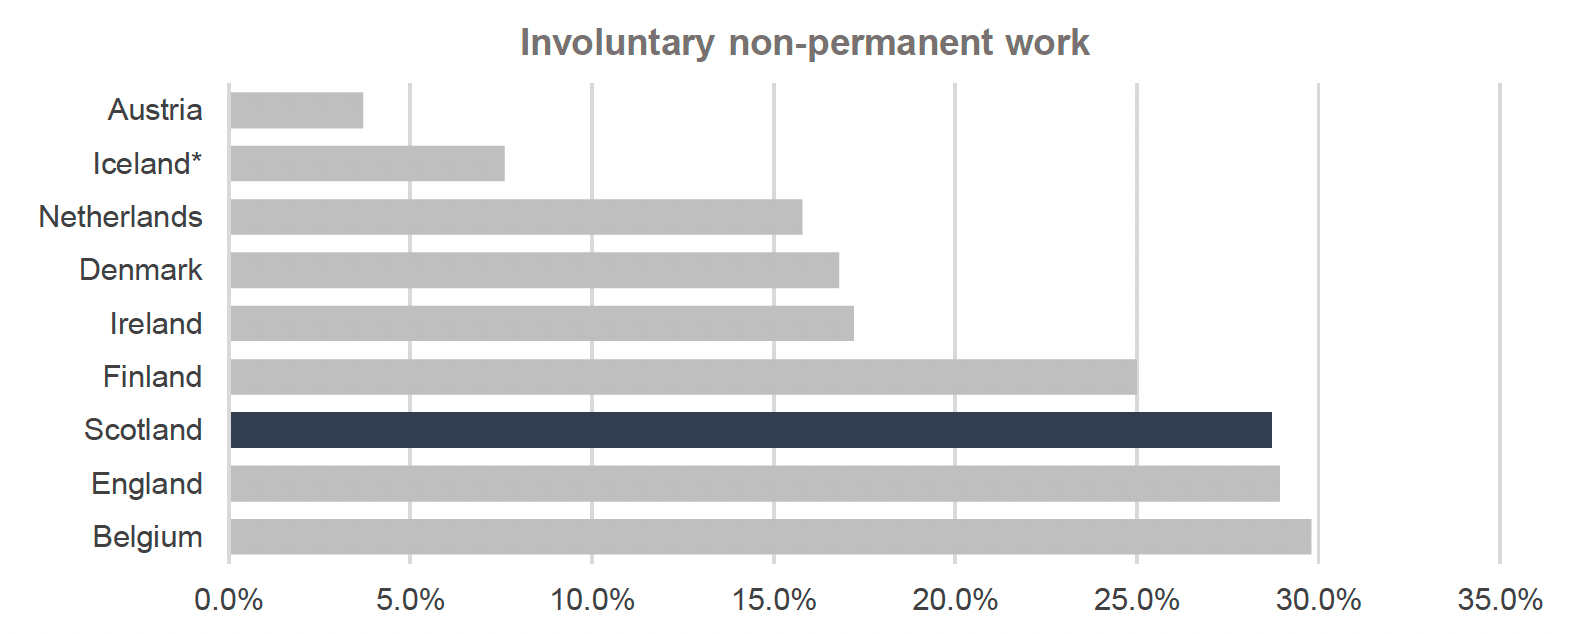 Graph depicts the percentage of workers in involuntary non-permanent work in countries in the International Framework in 2021, in a bar chart highlighting Scotland’s figure in a different colour. Scotland ranks sixth out of eight countries. Data was not available for Iceland in 2021. In Austria, 3.7% of workers were in involuntary non-permanent work. In the Netherlands, 15.8% of workers were in involuntary non-permanent work. In Denmark, 16.8% of workers were in involuntary non-permanent work. In Ireland, 17.2% of workers were in involuntary non-permanent work. In Finland, 25% of workers were in involuntary non-permanent work. In Scotland, 28.7% of workers were in involuntary non-permanent work. In England, 28.9% of workers were in involuntary non-permanent work. In Belgium, 29.8% of workers were in involuntary non-permanent work.